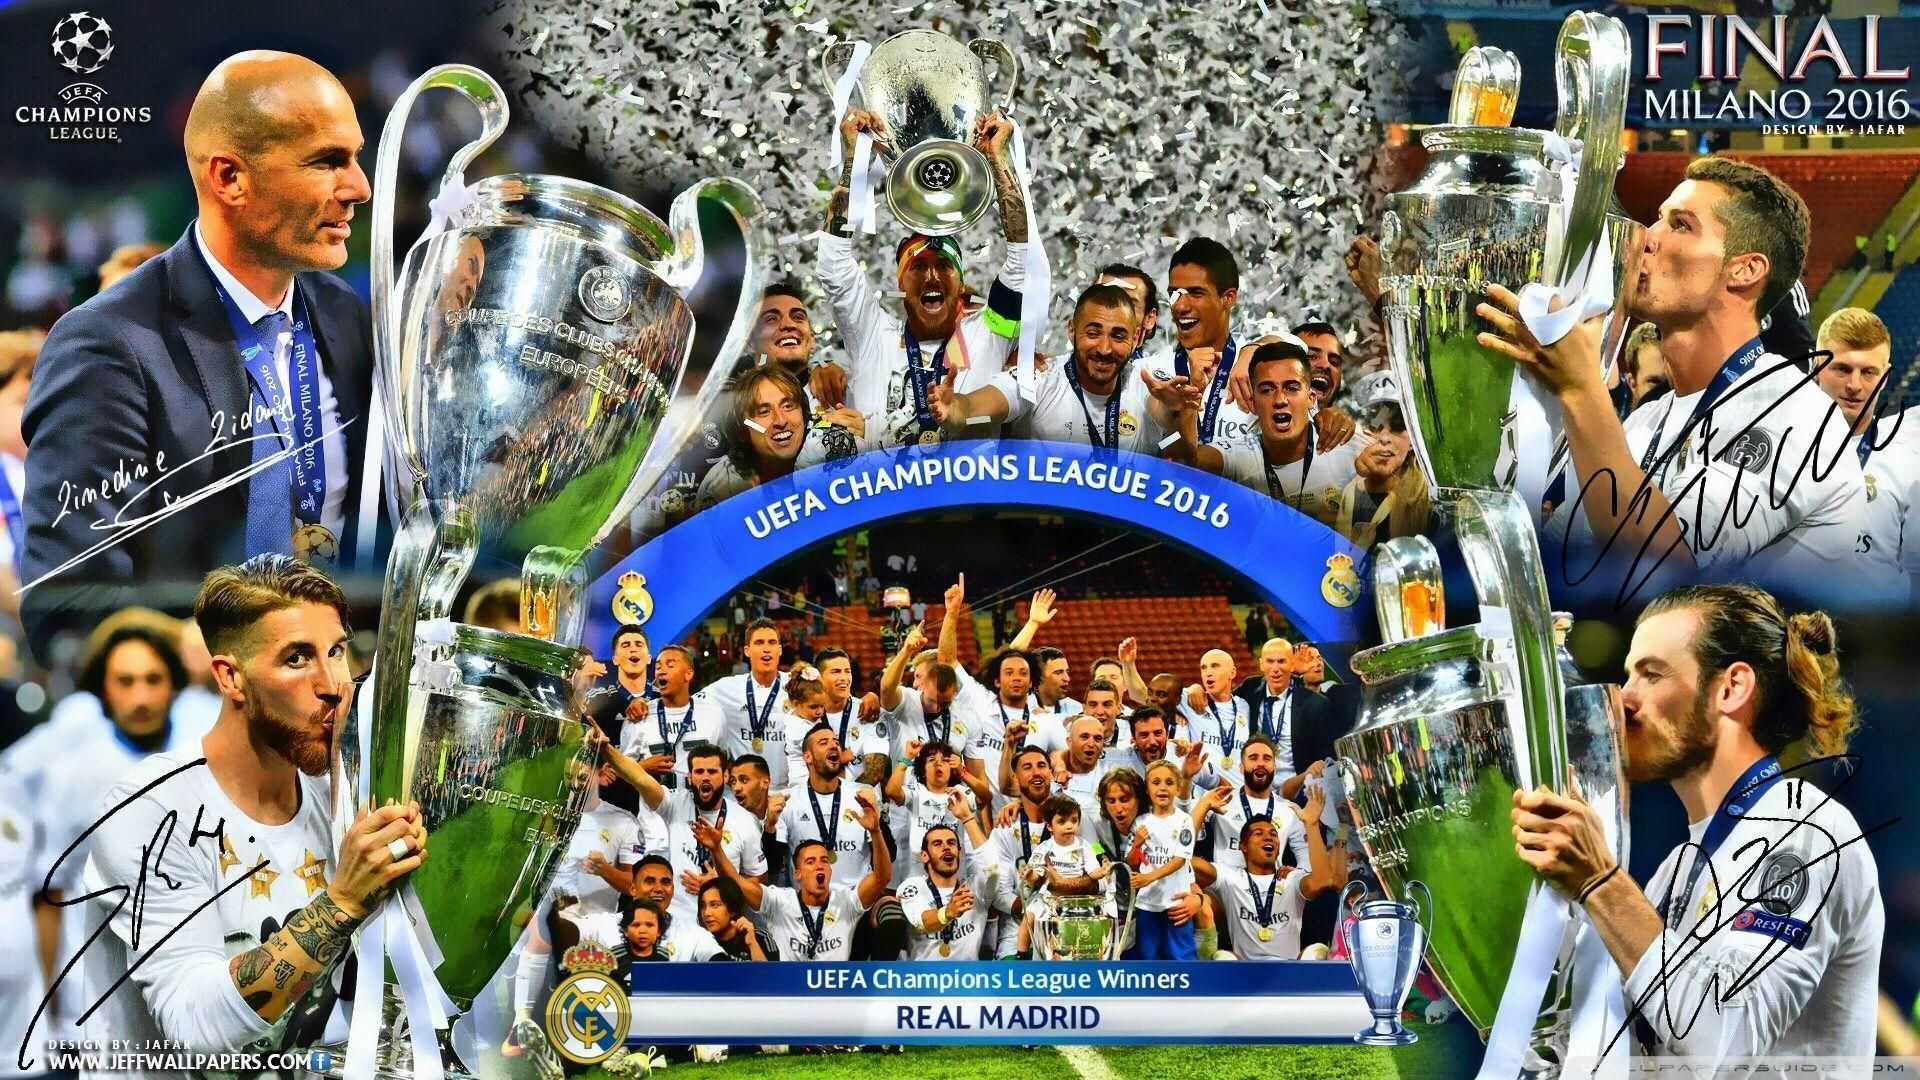 real madrid wallpaper 2018 for i mac book pro